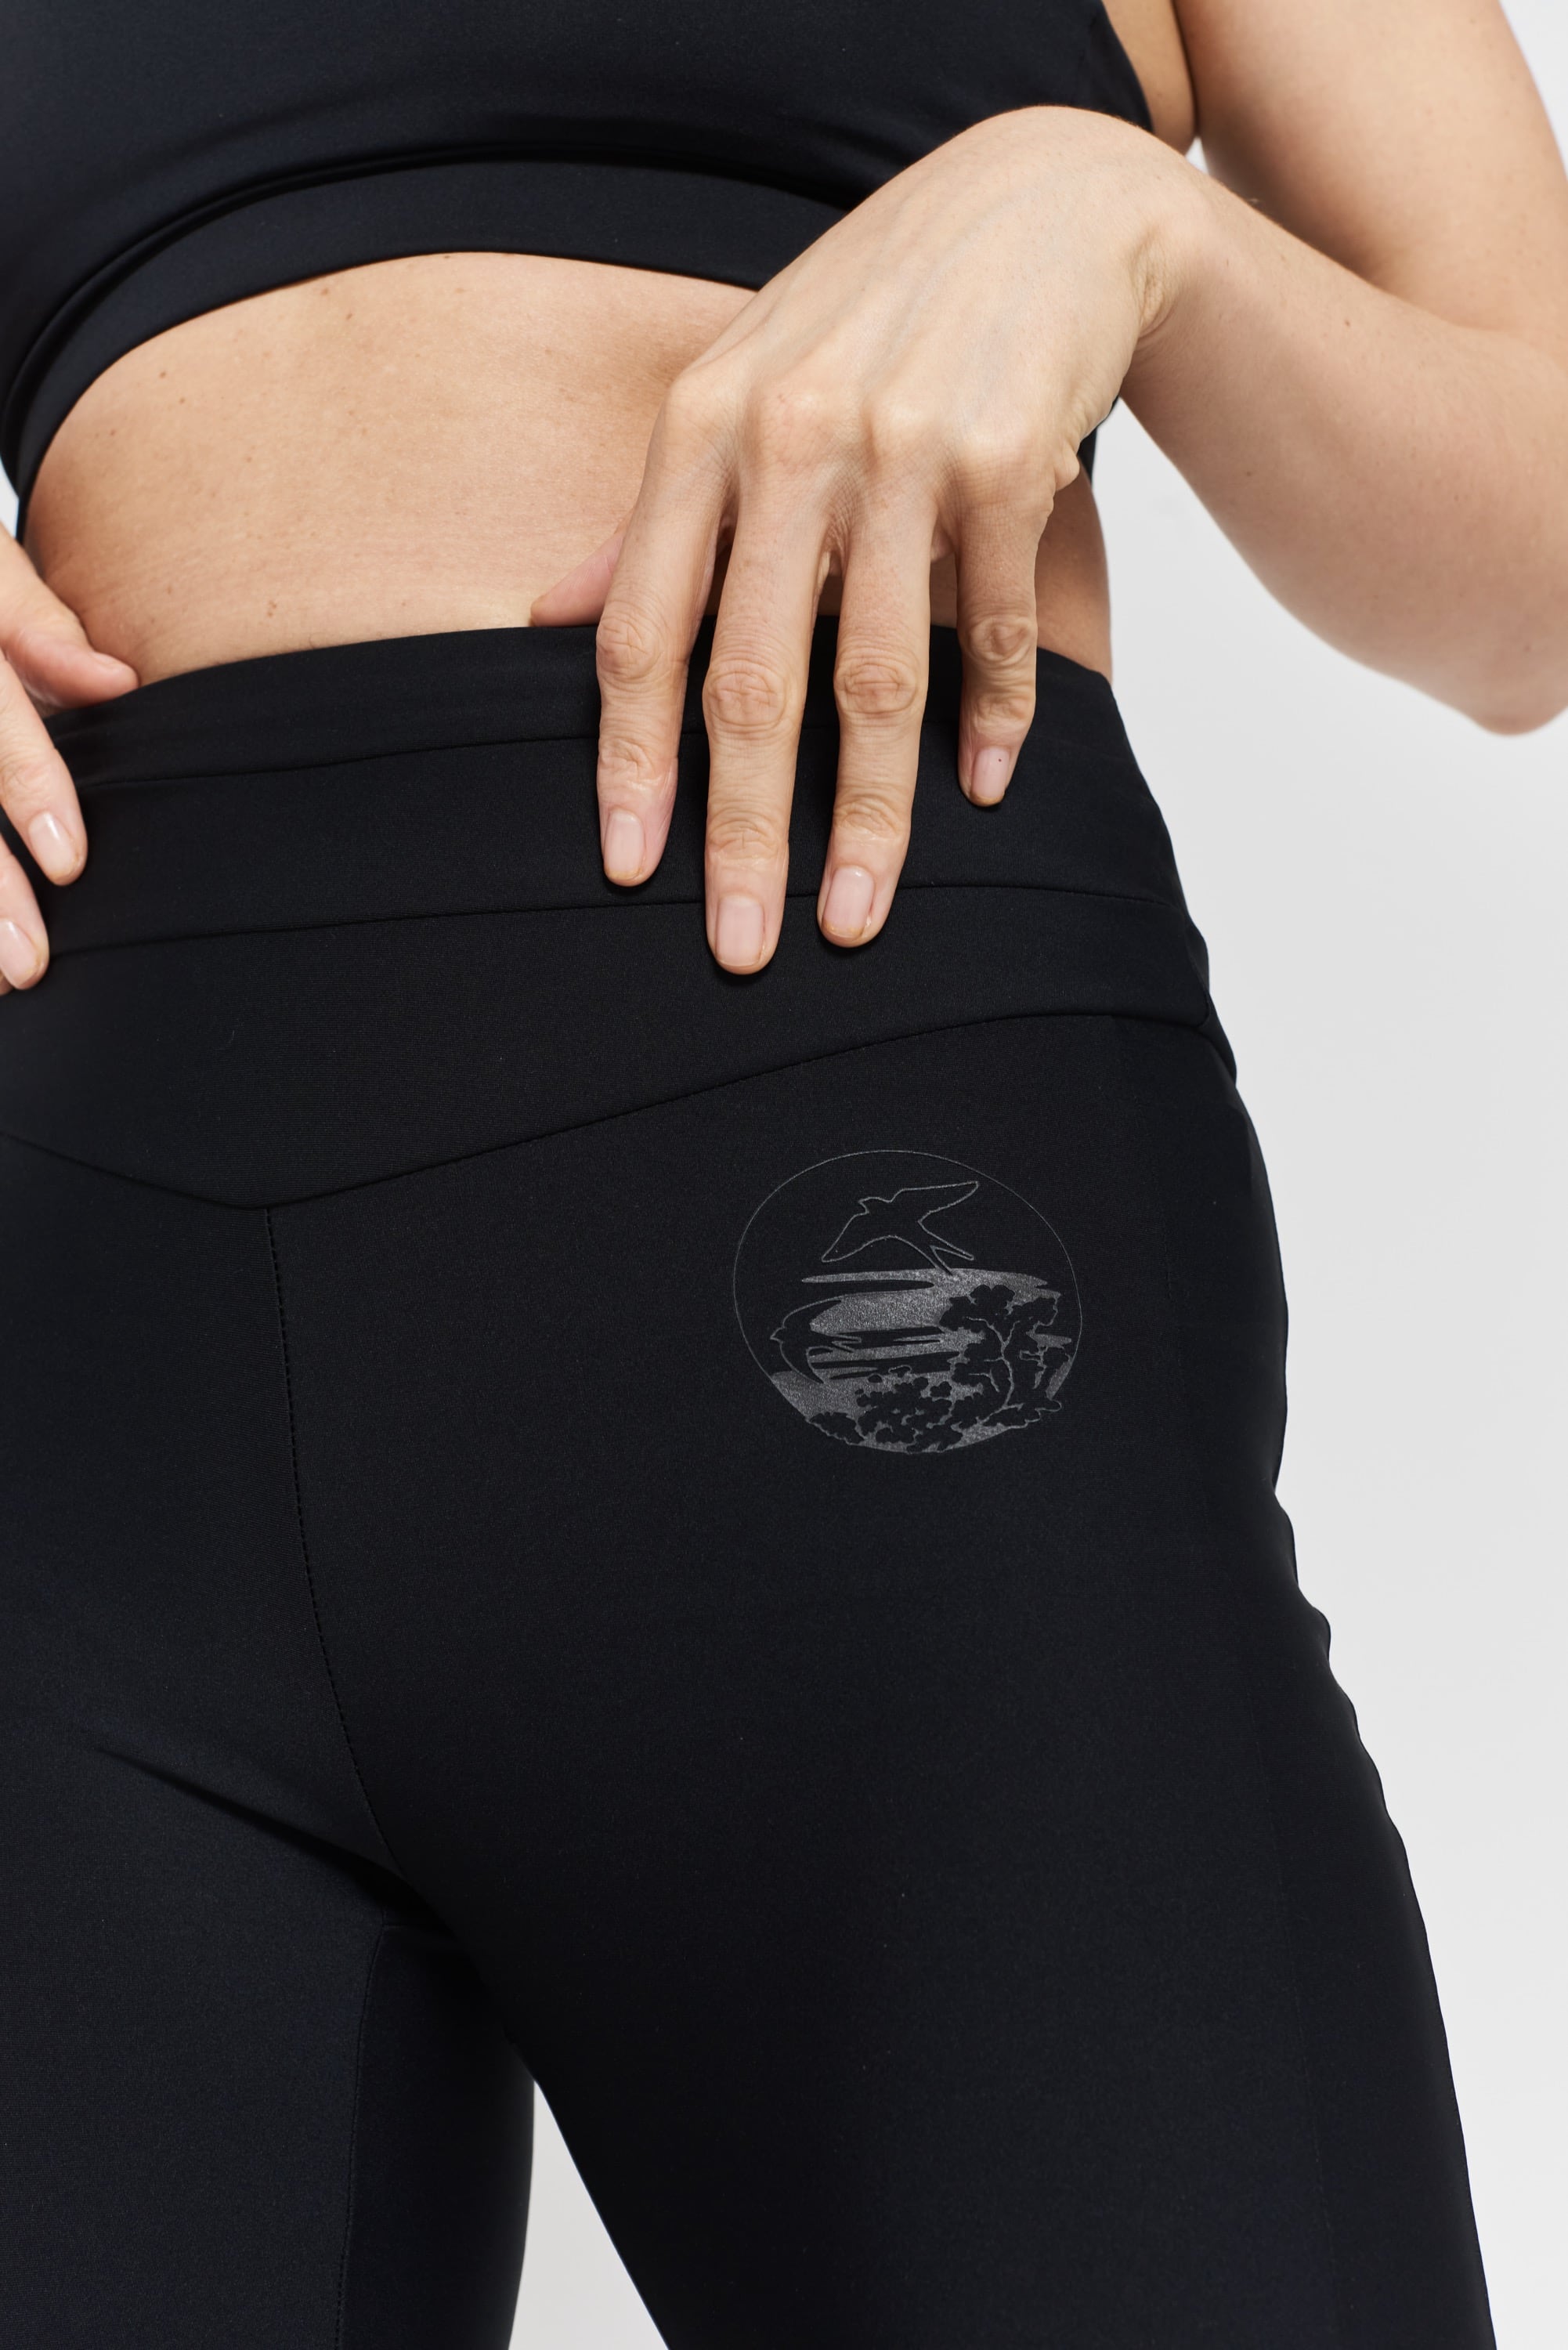 Cycad recycled-fabric performance leggings - Volcanic Black